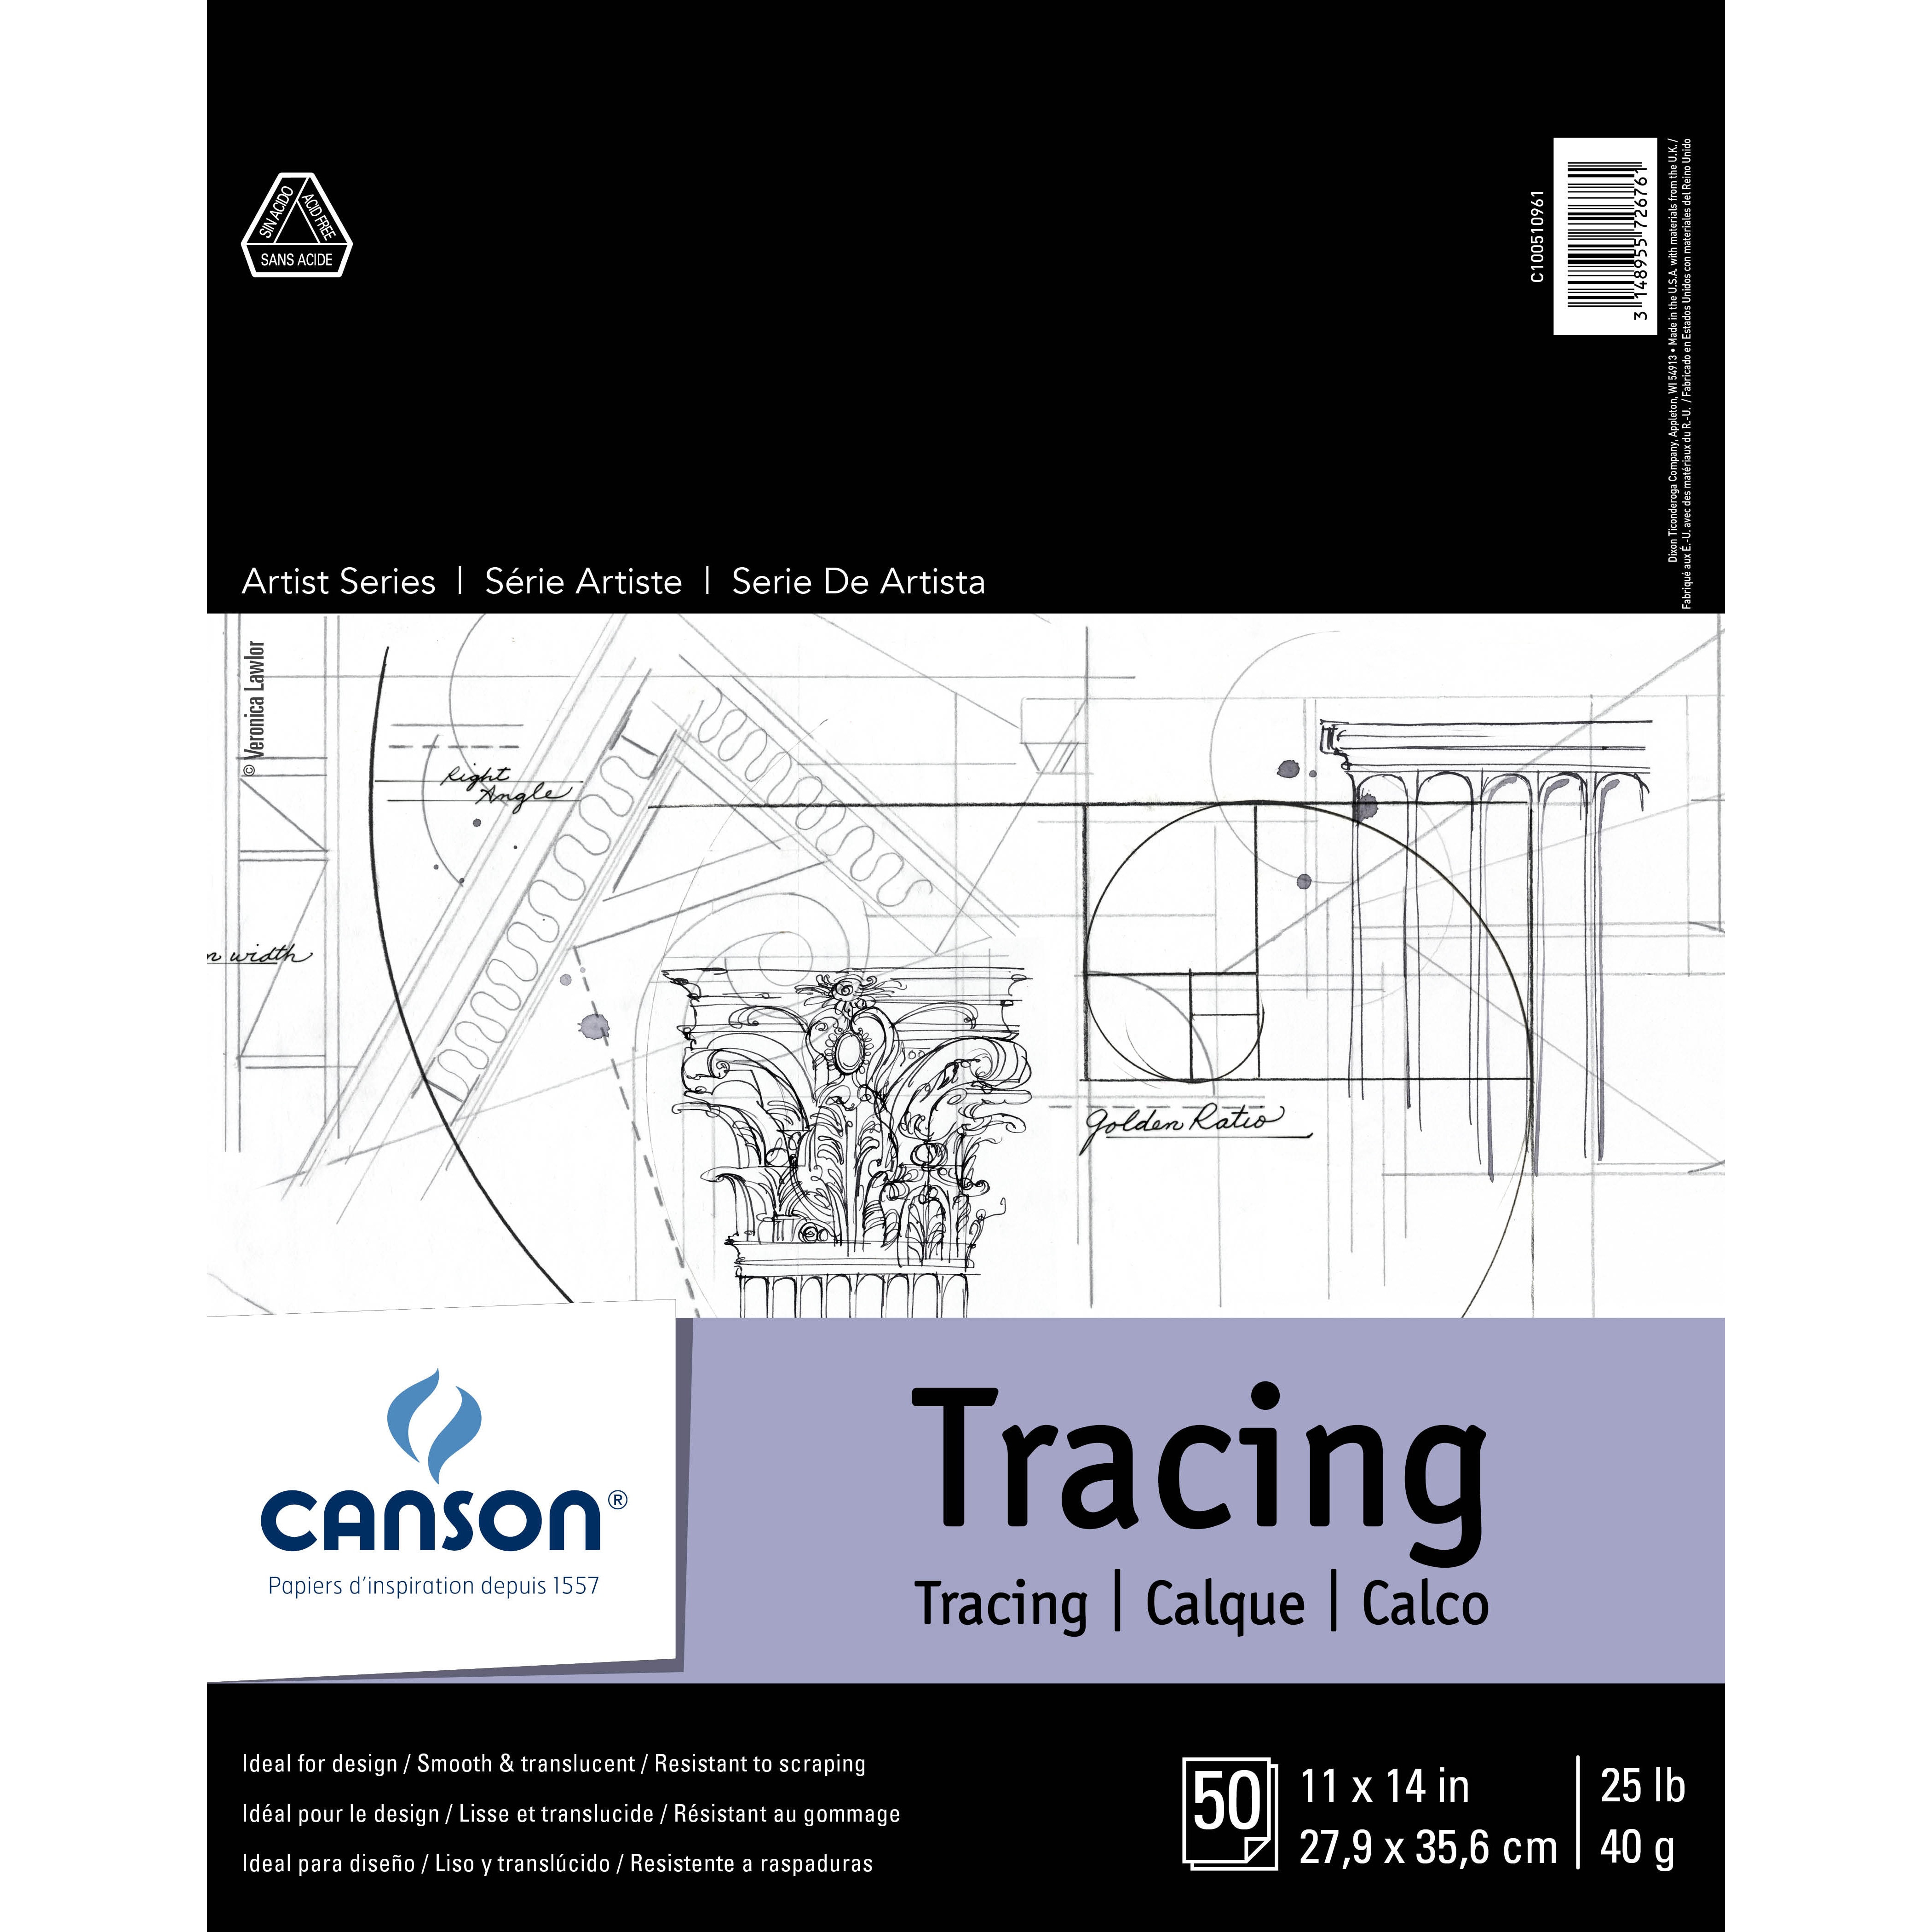 Canson Artist Series Tracing Pad, 50 Sheets, 11" x 14"